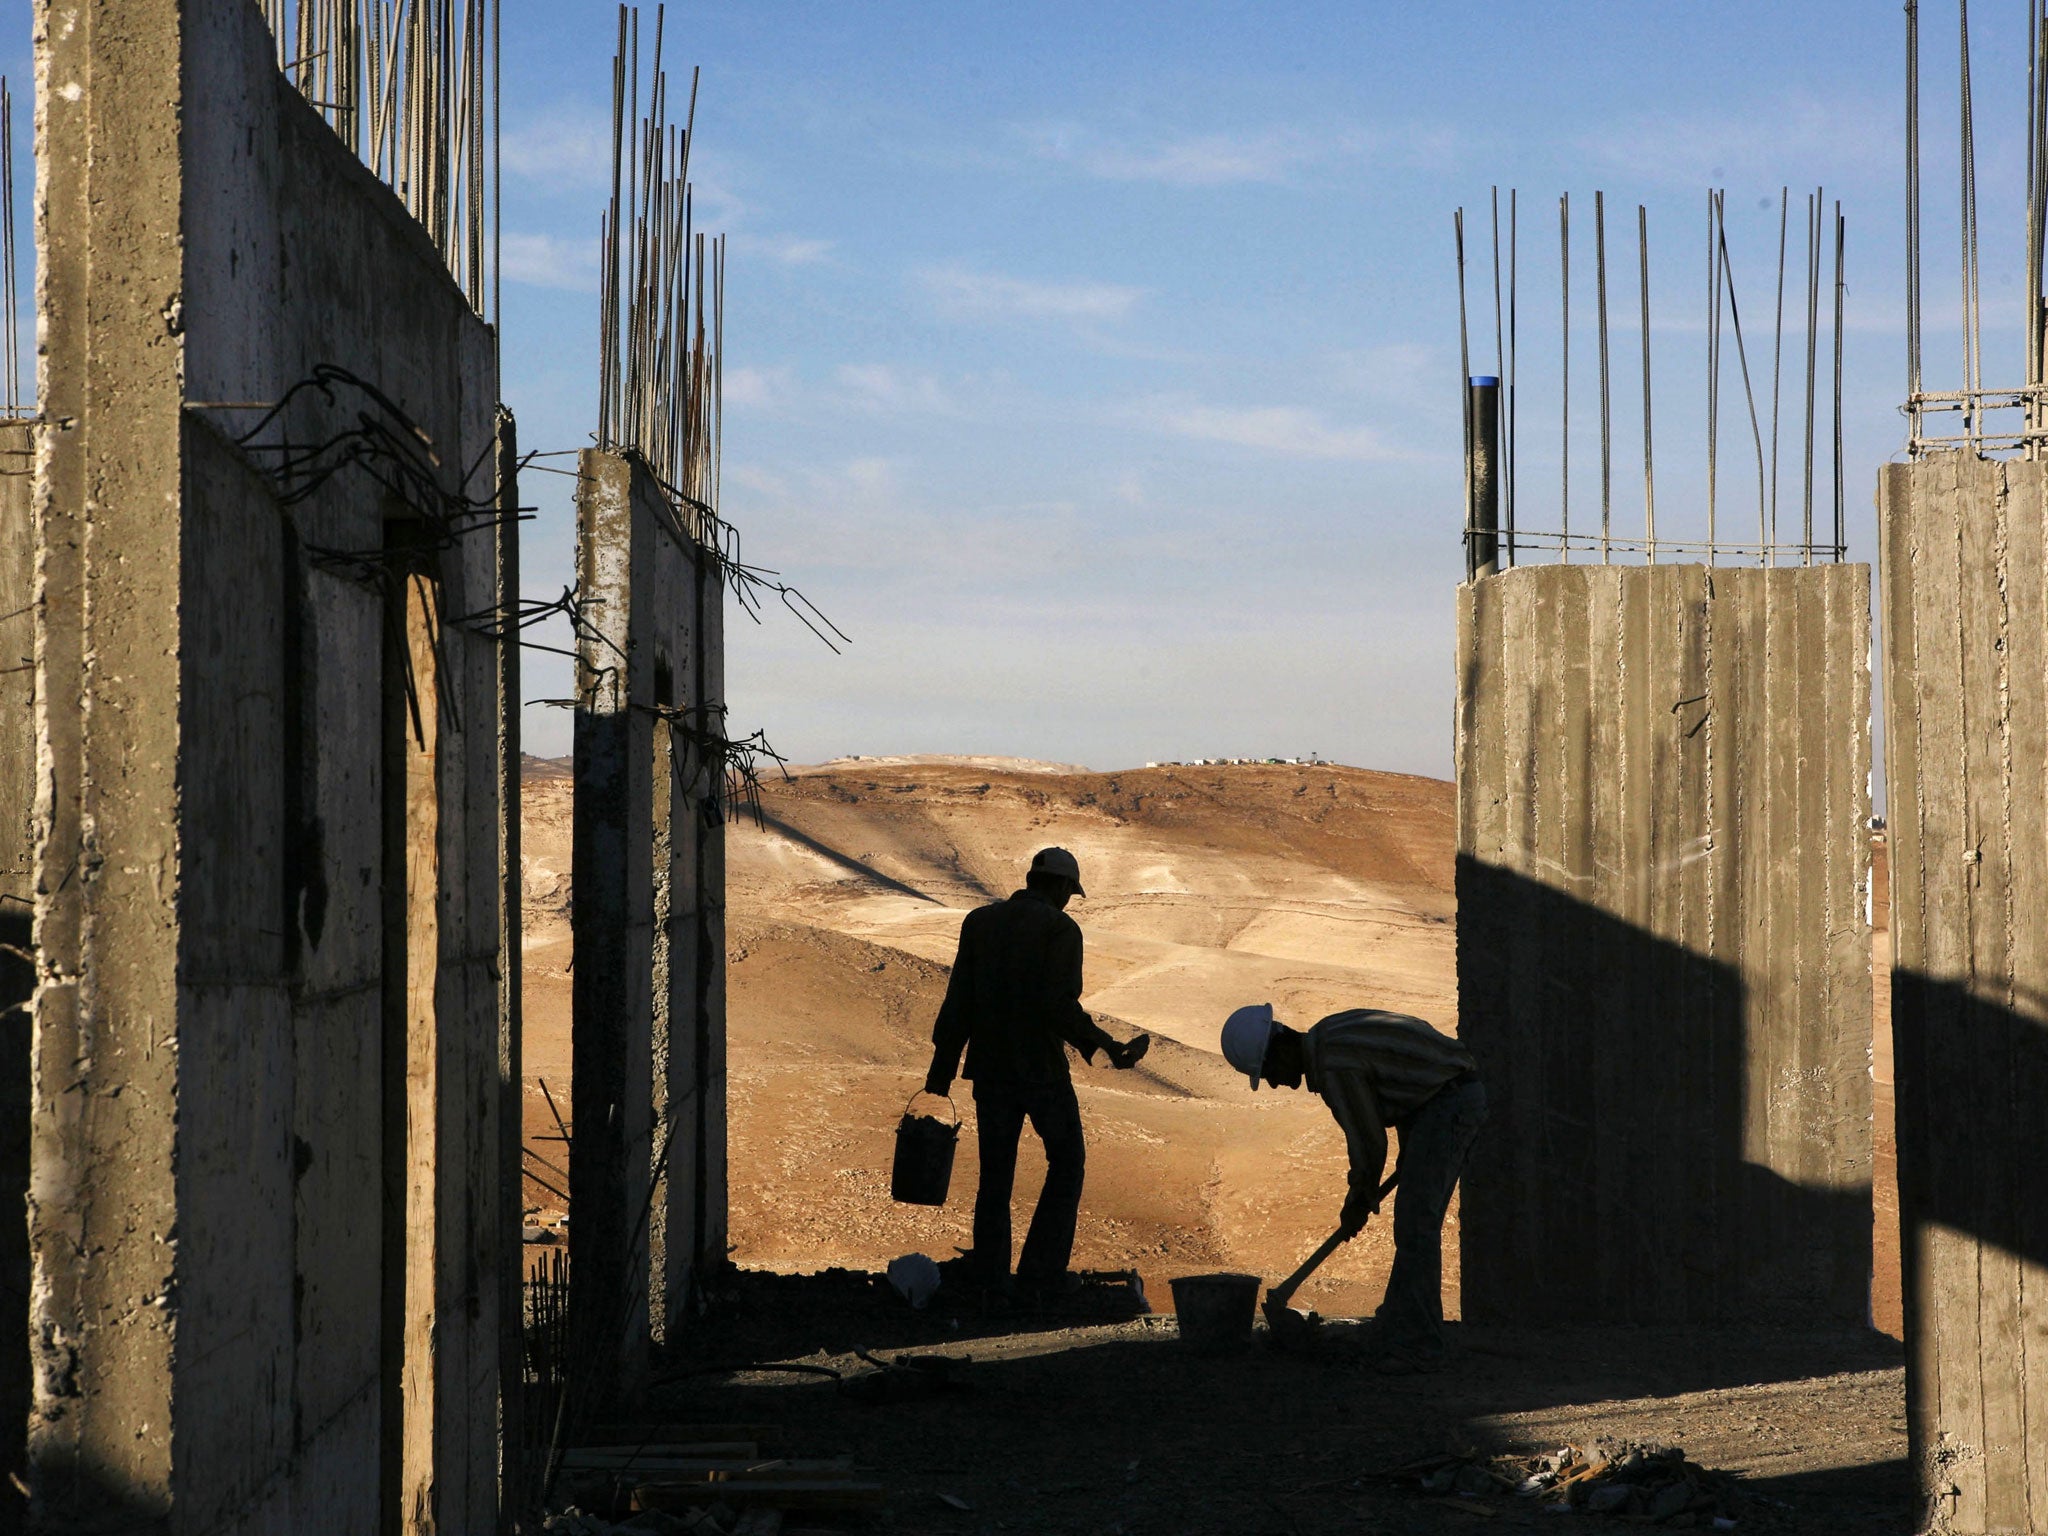 Palestinian construction laborers work on a new housing development in the West Bank Jewish settlement of Maaleh Adumim, near Jerusalem. Israel has announced plans to build 1,500 new homes in east Jerusalem, the part of the city claimed by the Palestinian